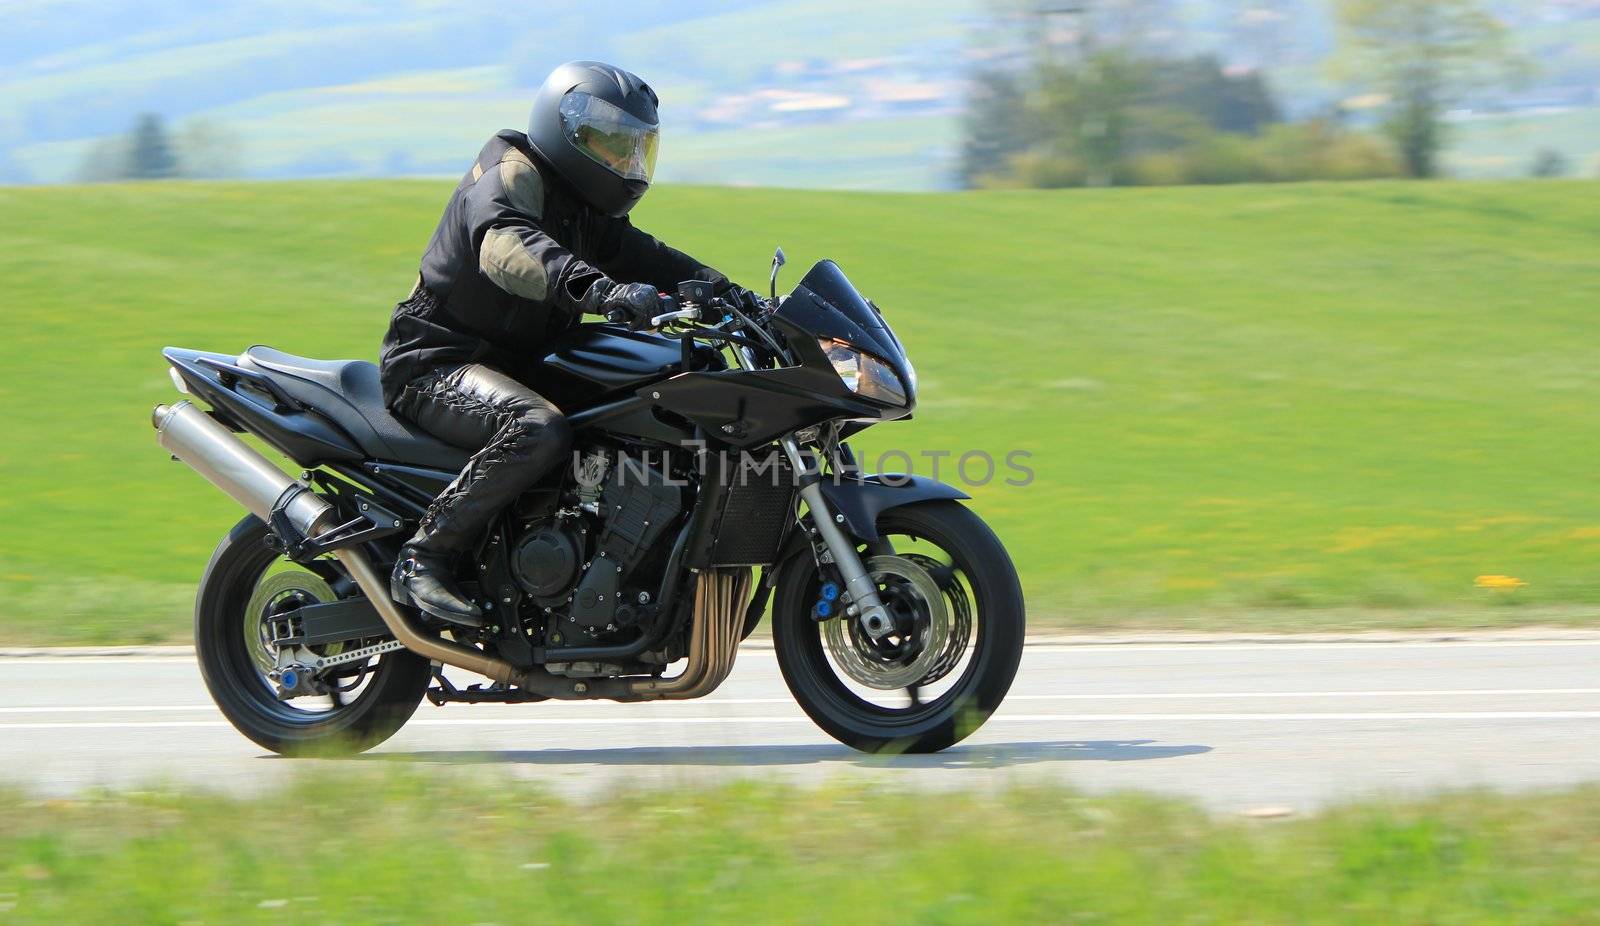 Biker wearing black clothes and driving a big motobike in the countryside